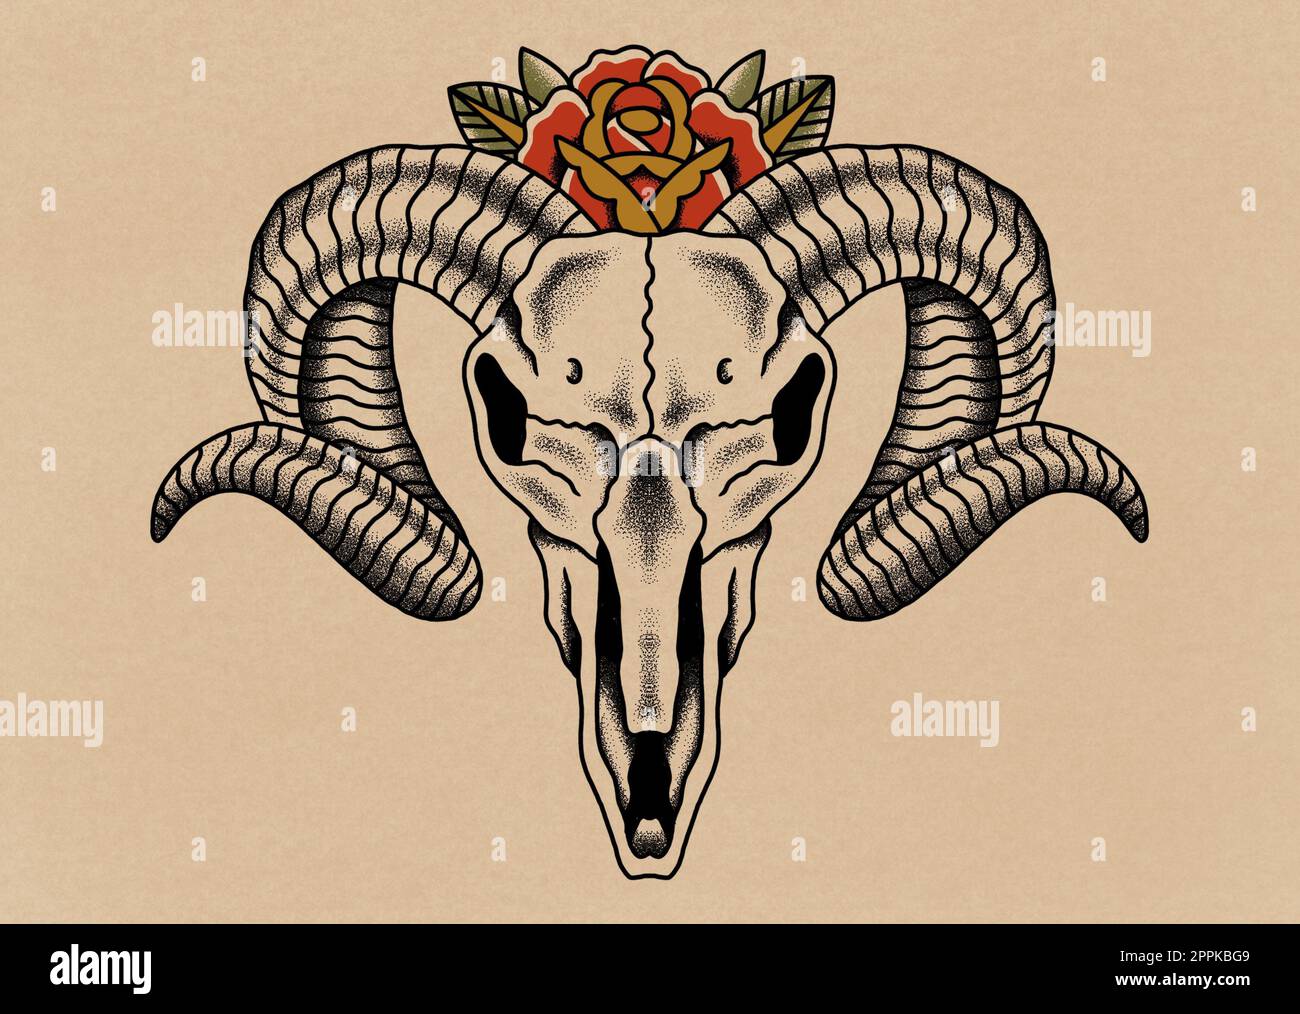 Old school tattoo art style drawing goat skull with rose on old paper background Stock Photo